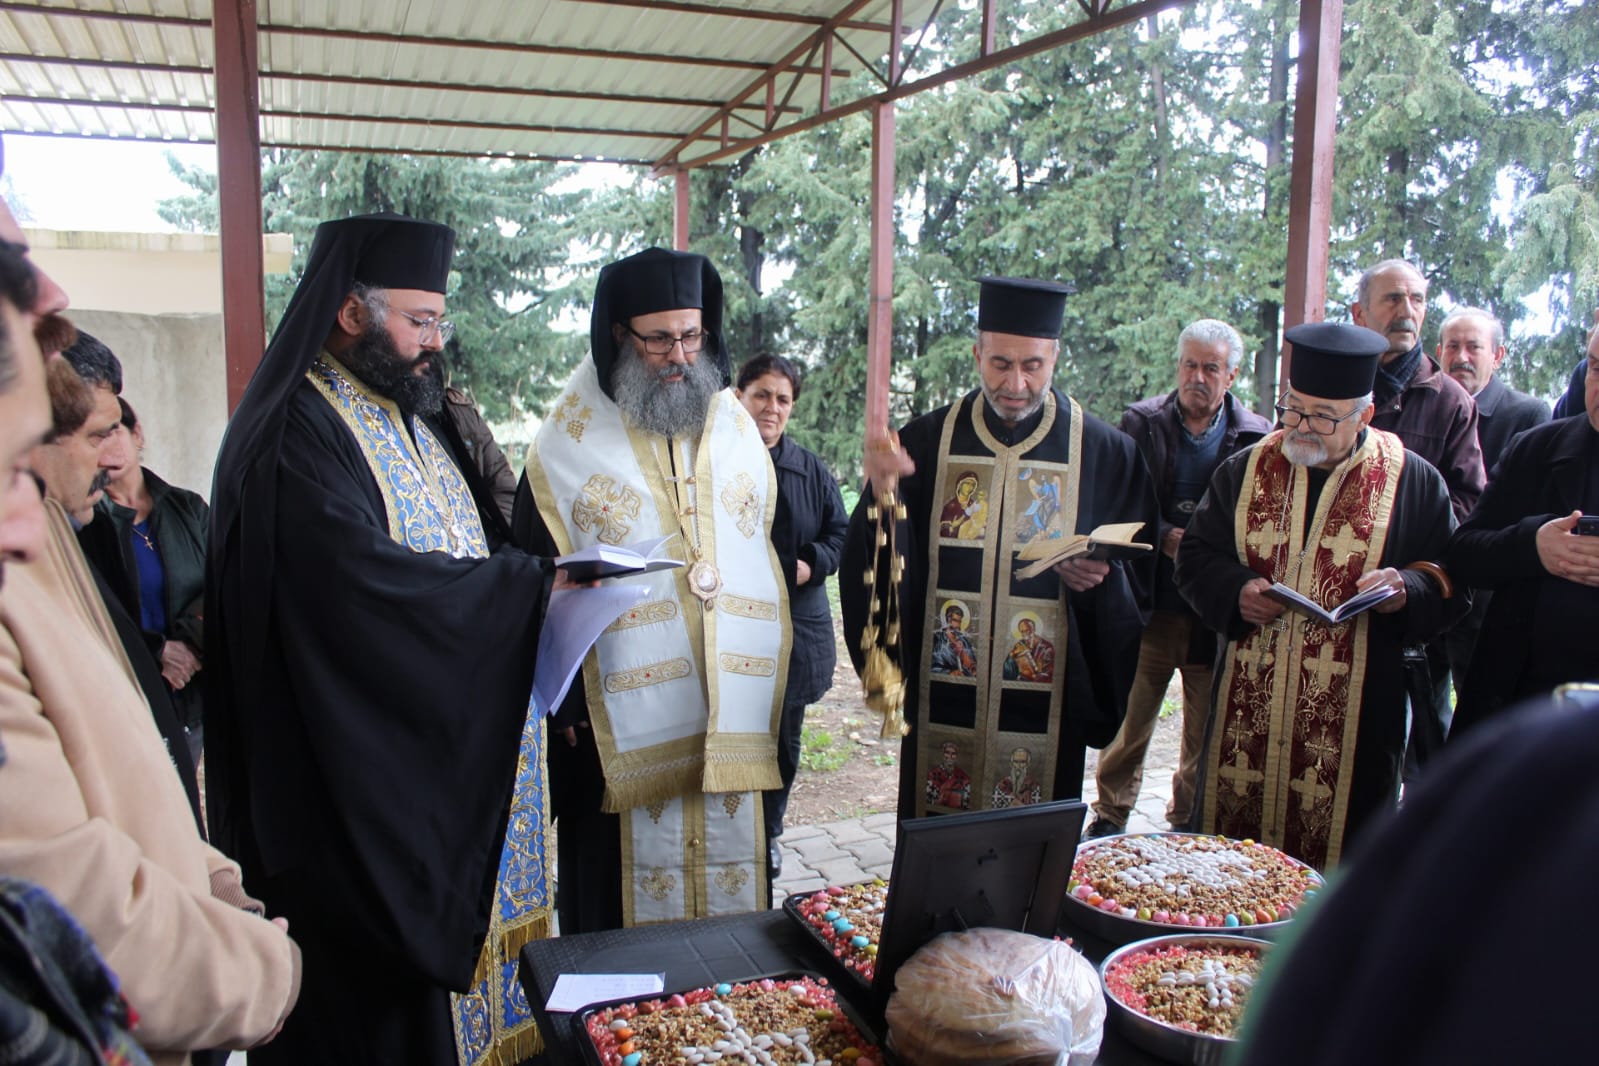 Bishop of Hierapolis performed Trisagion for Earthquake victims in Antakya